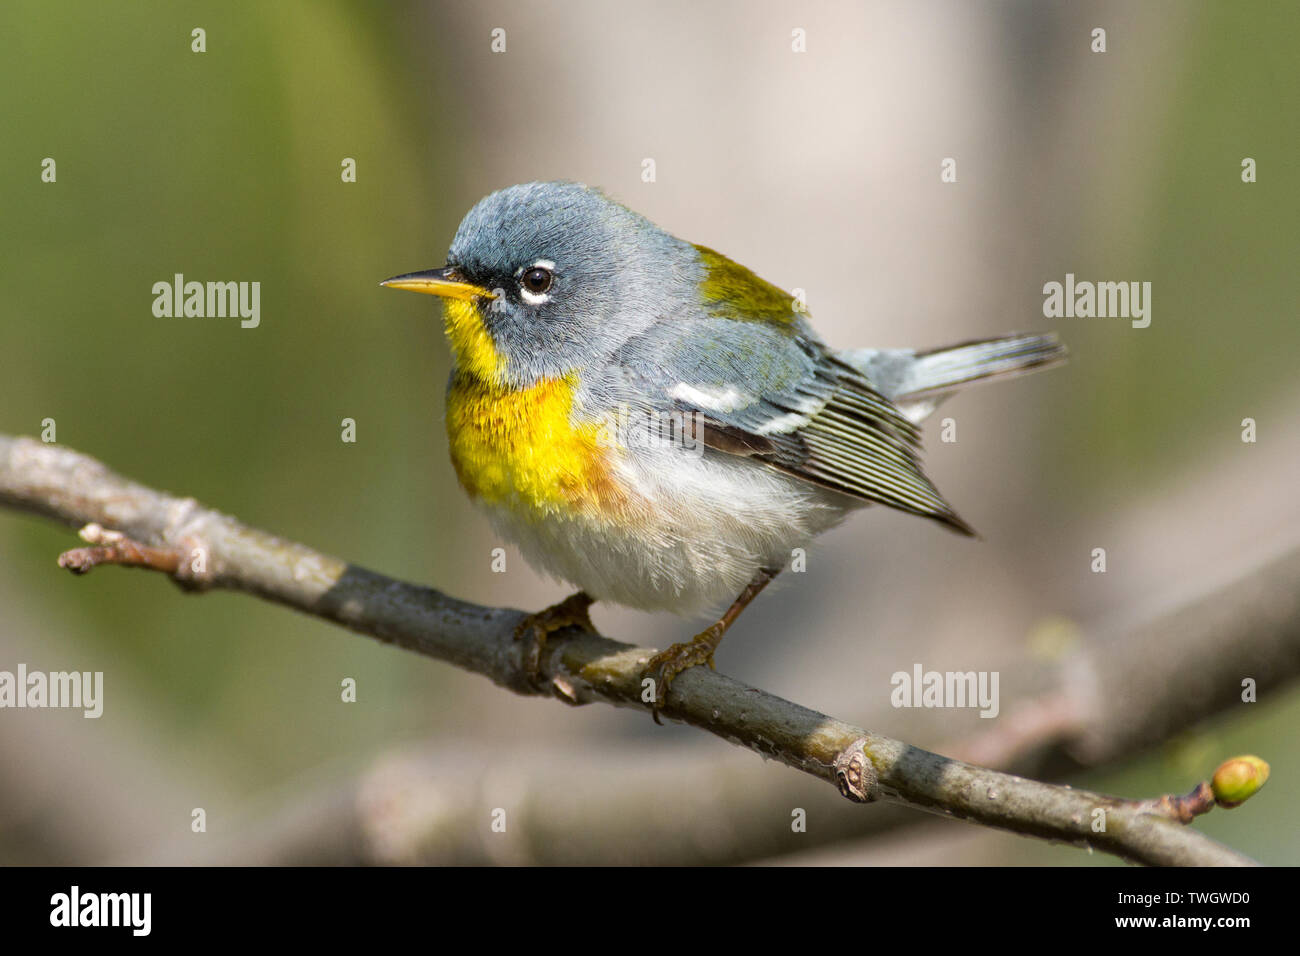 A northern parula (Setophaga americana) perched on a branch during spring migration. Stock Photo